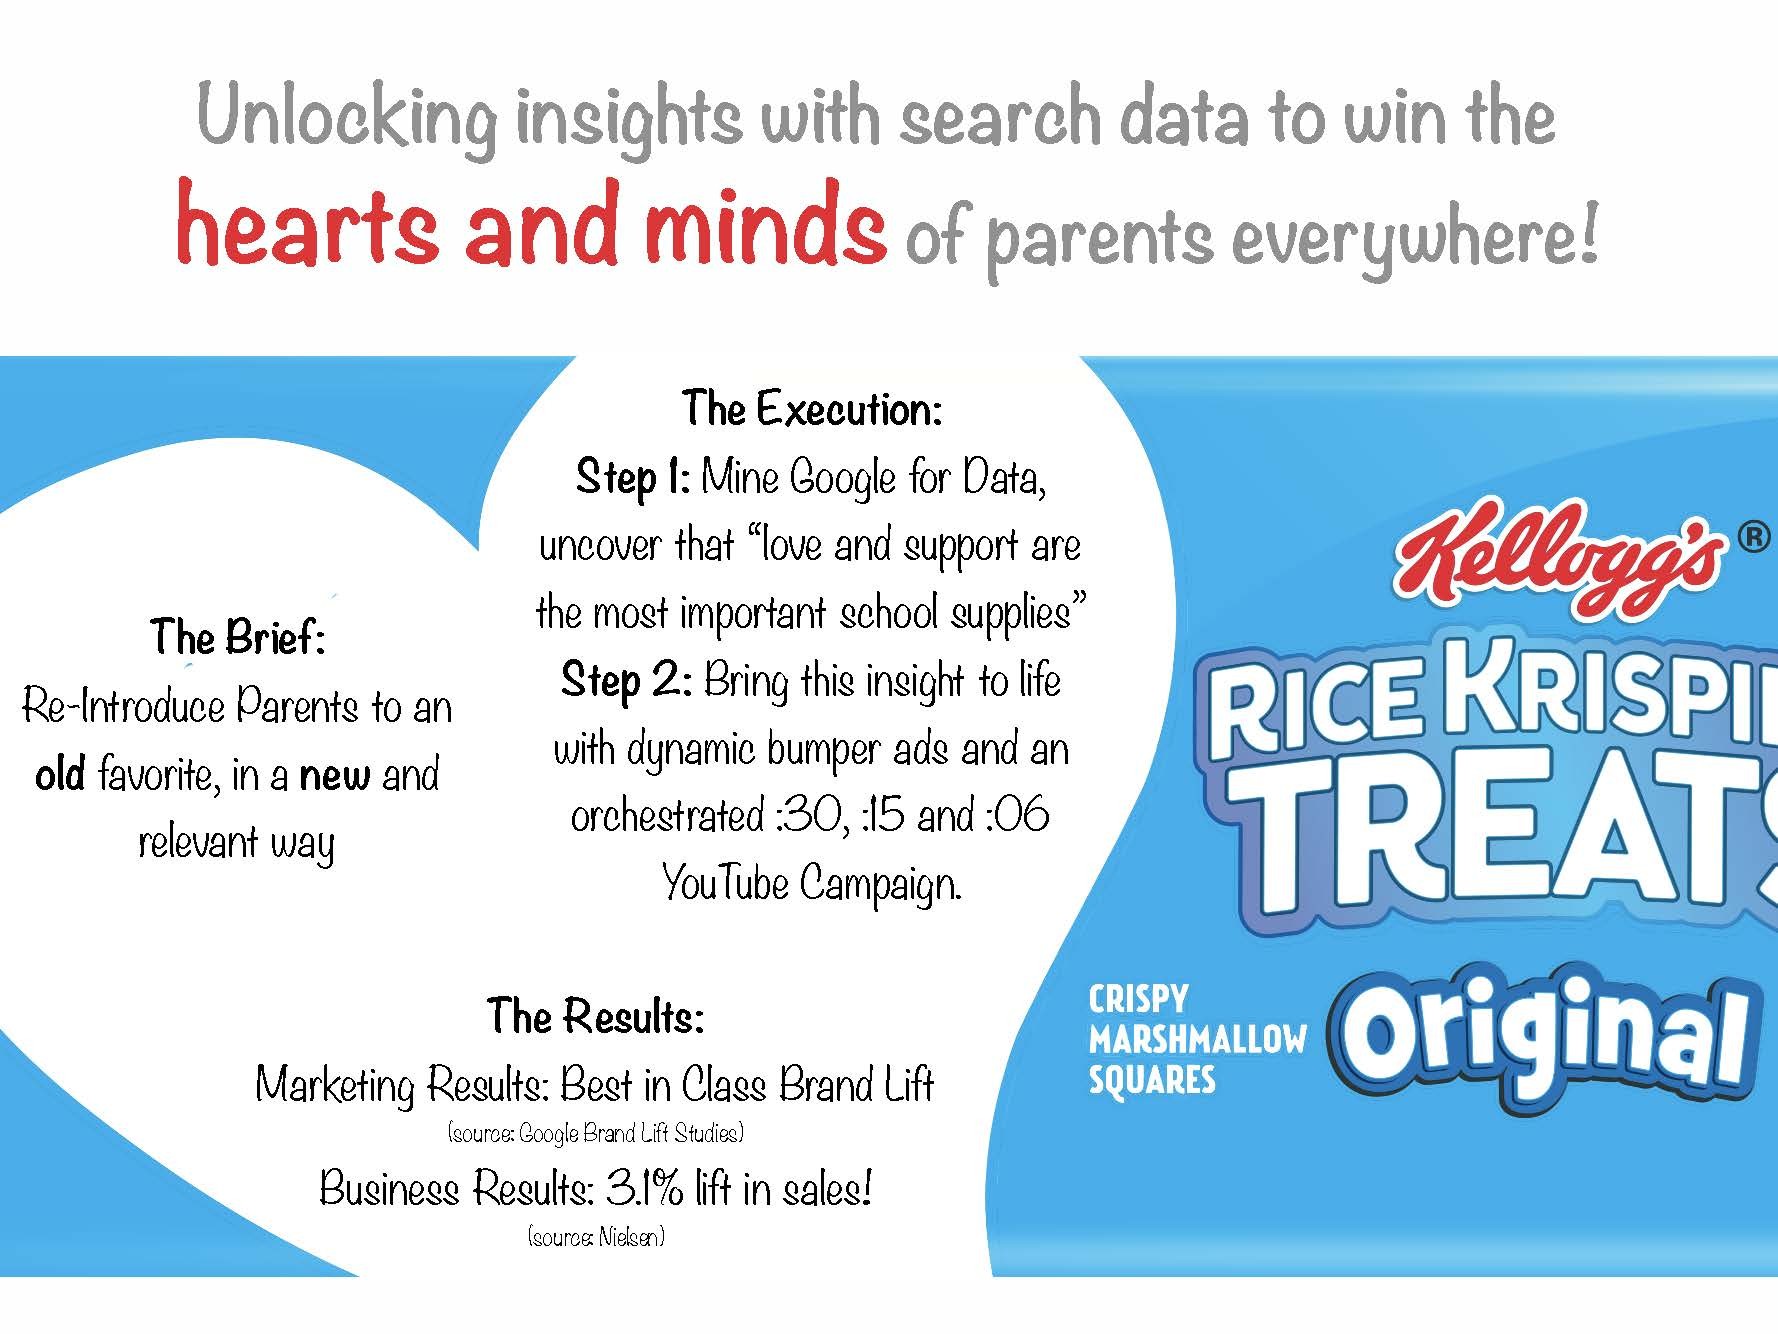 So Much to Love About Kellogg's Rice Krispies Treats